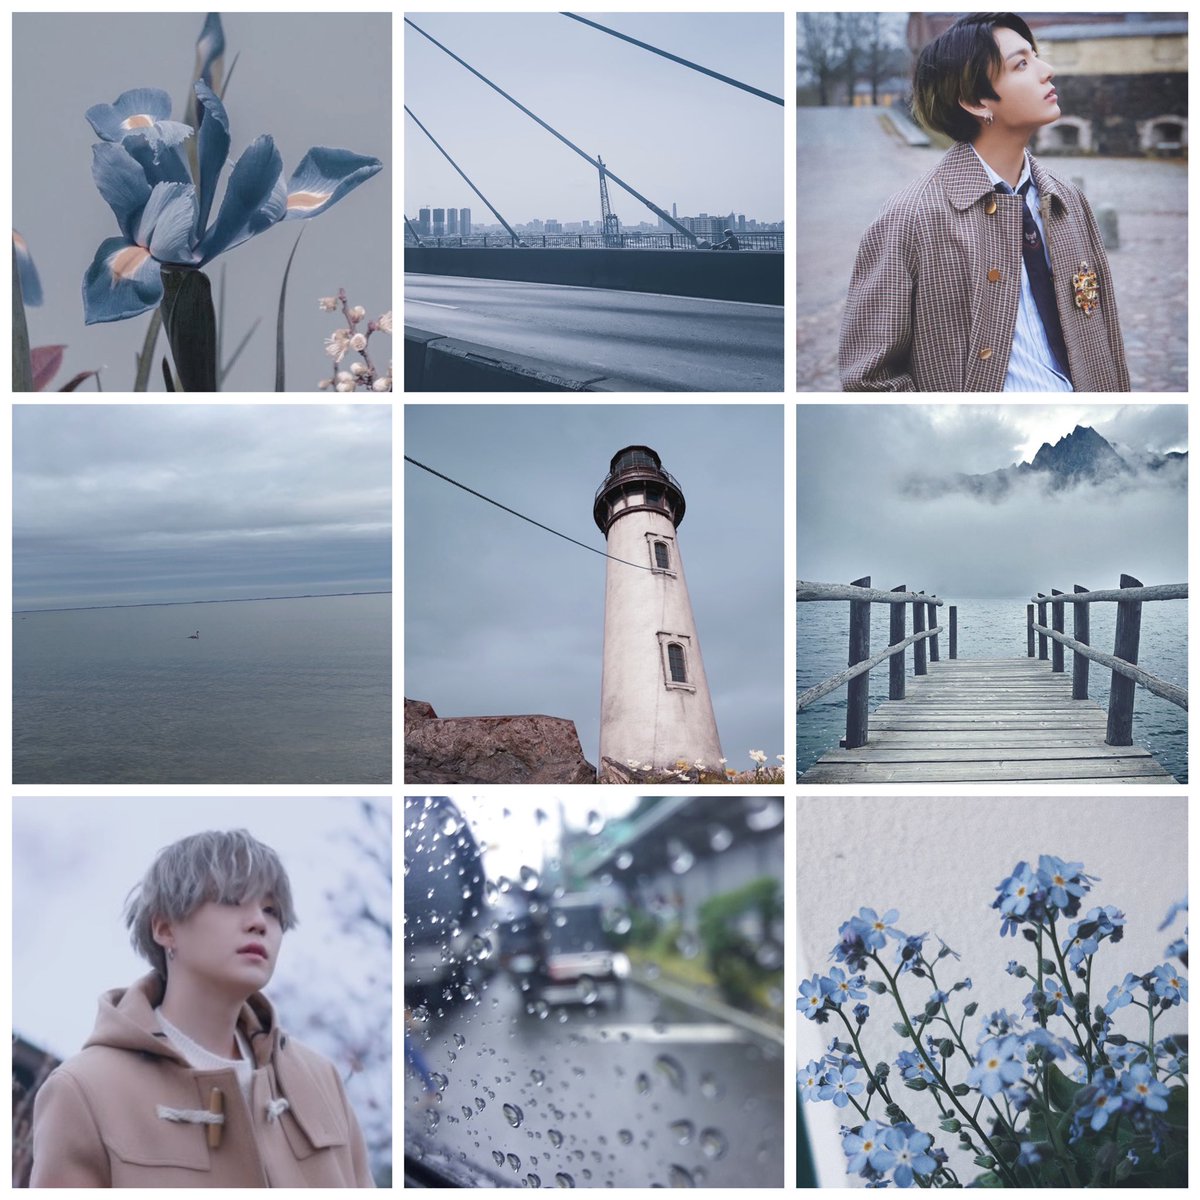 euphoria | yoonkook aufor years, yoongi has been living w/ the feeling that he’s forgotten a part of his memory. when he asked his brother, he never got a straight answer. eventually, yoon gave up & went on w/ life. it isn’t until he begins have flashbacks of a mysterious boy.